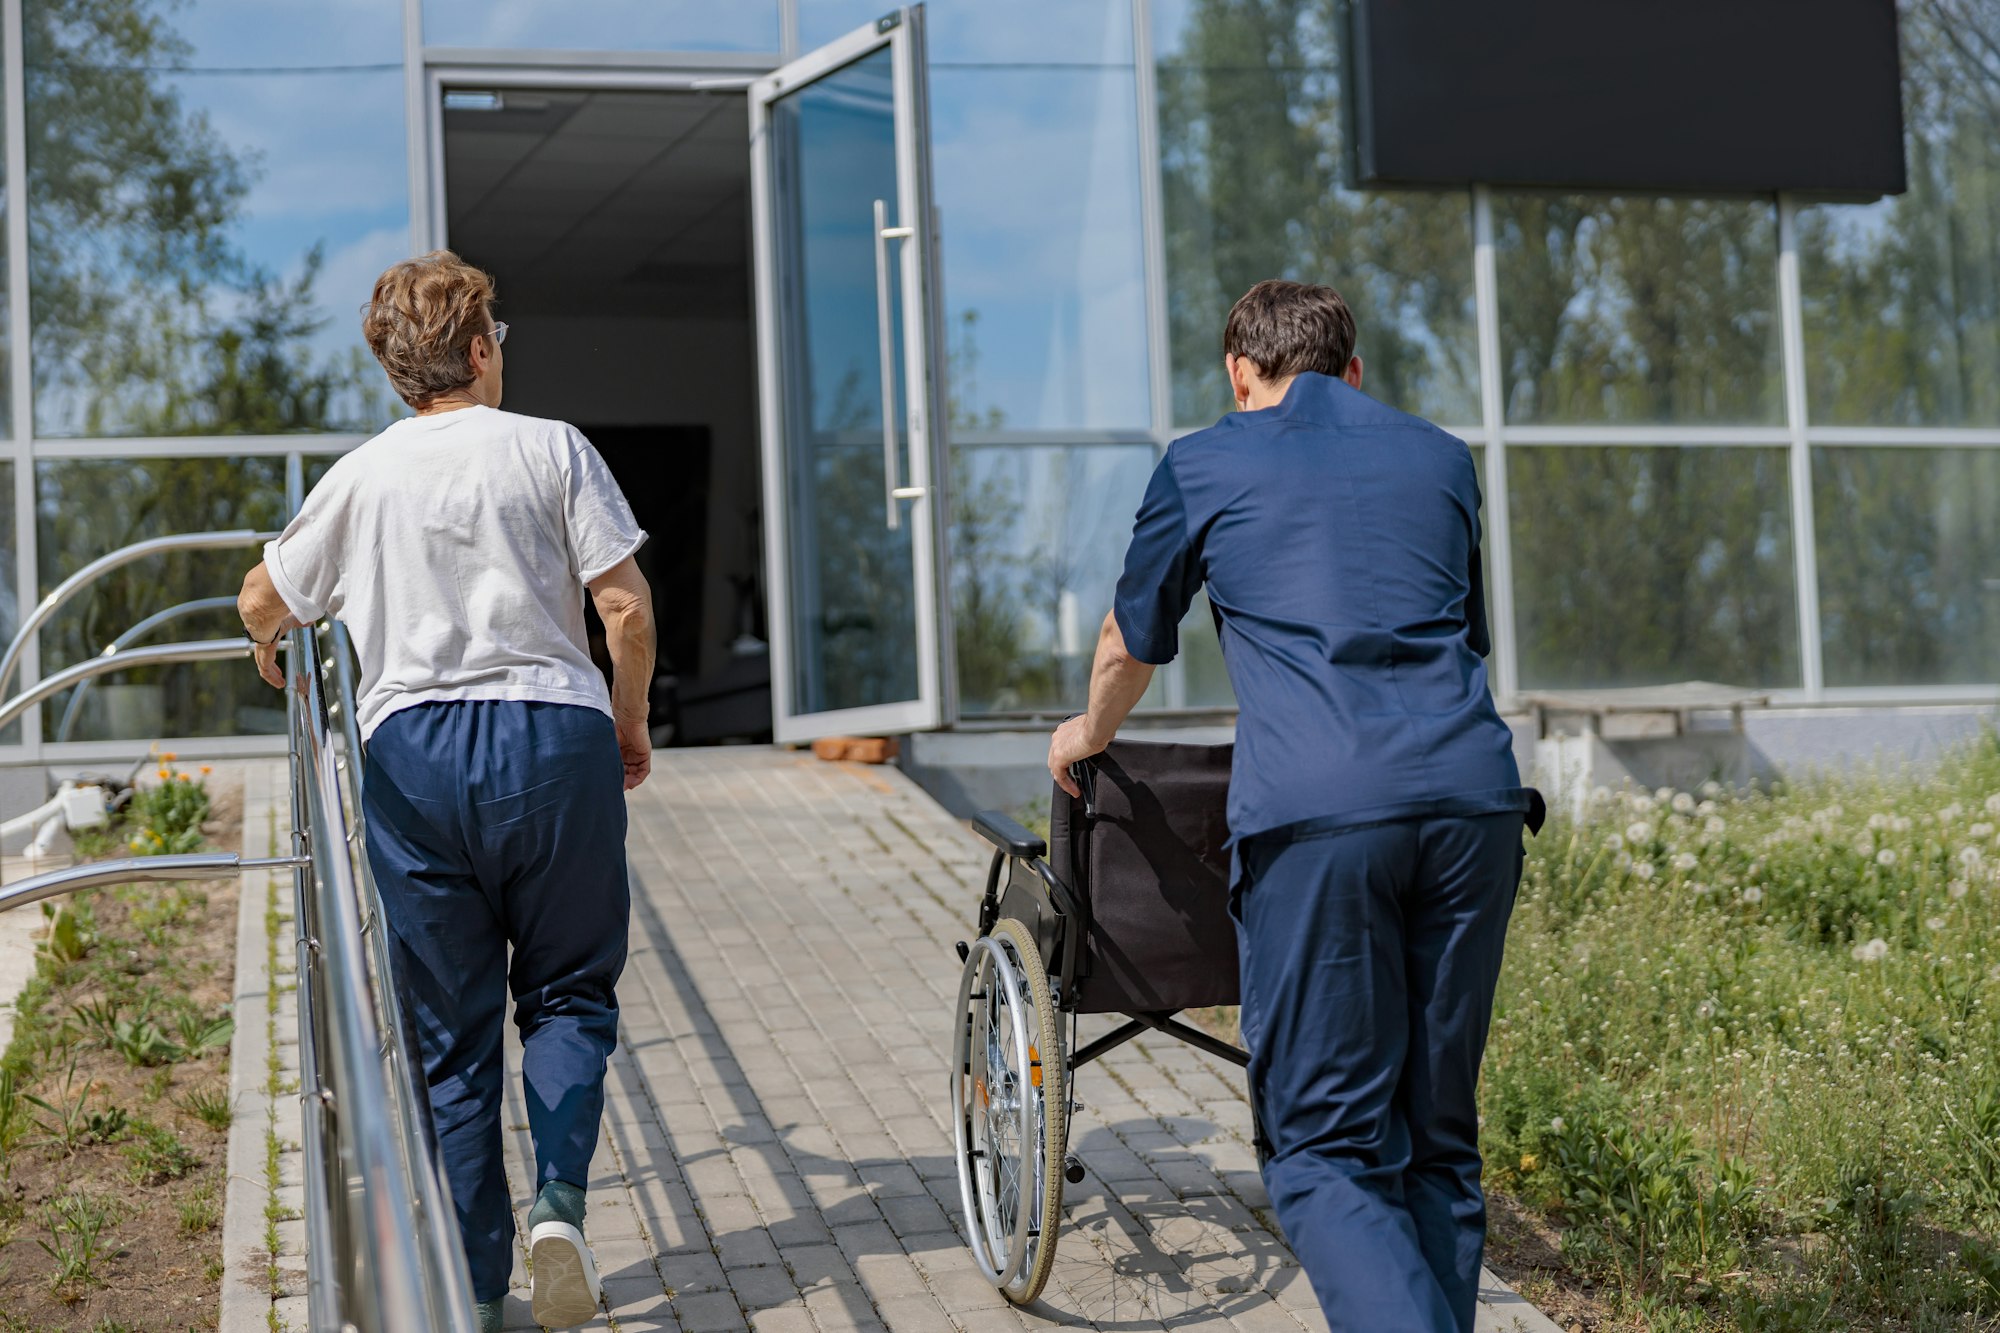 Patient and nurse turn around at clinic after a walk in courtyard